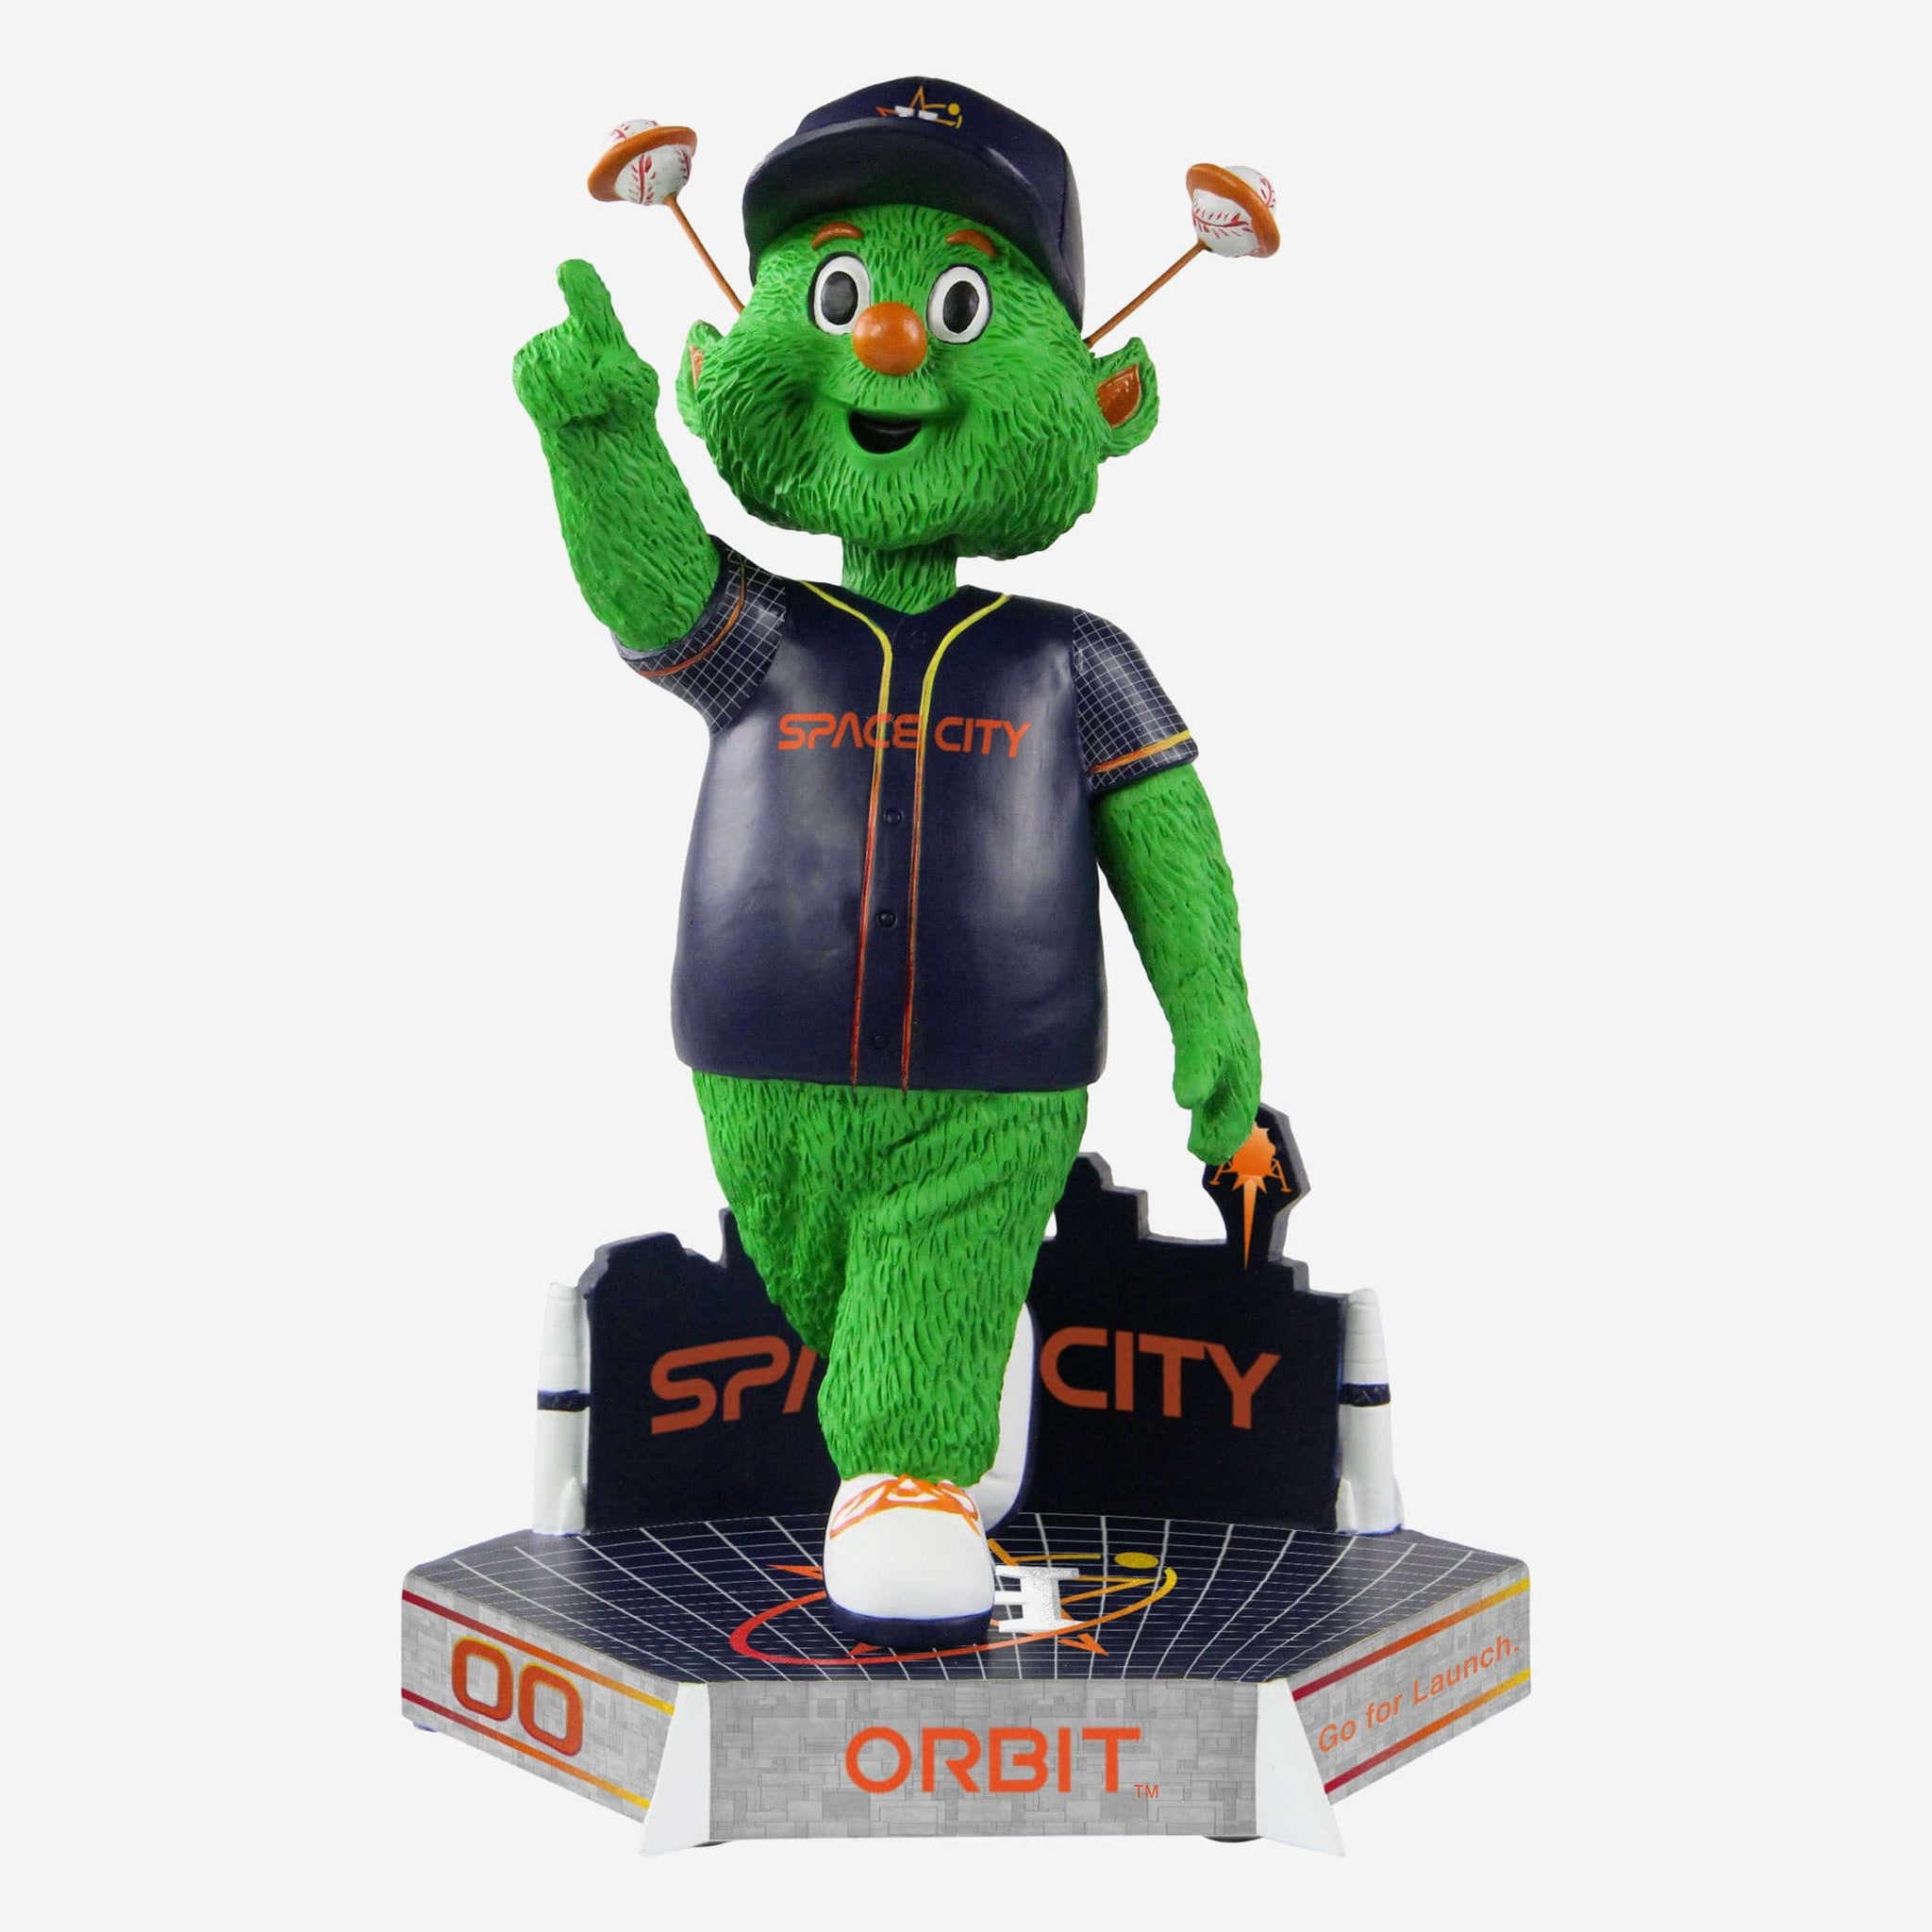 Get Astros 2022 FOCO World Series Championship Bobbleheads and